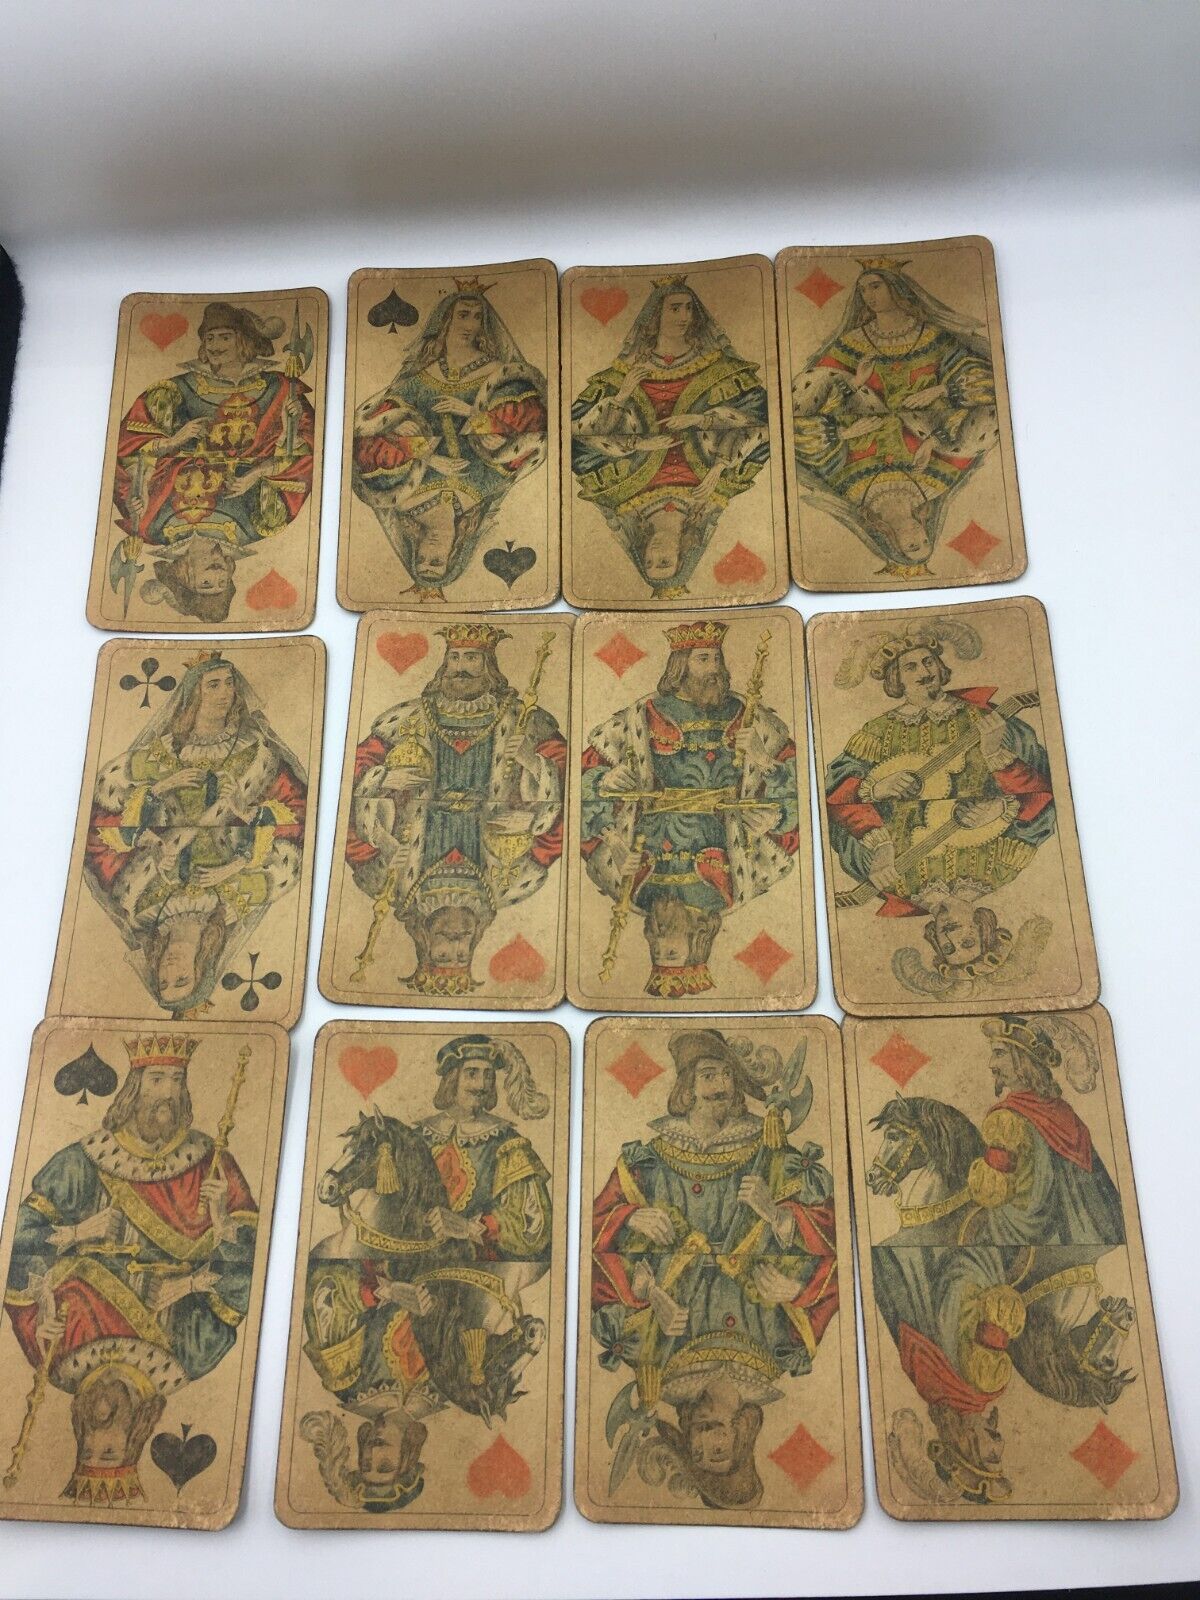 ANTIQUE RARE GERMAN PLAYING CARDS 1800s AUTHENTIC